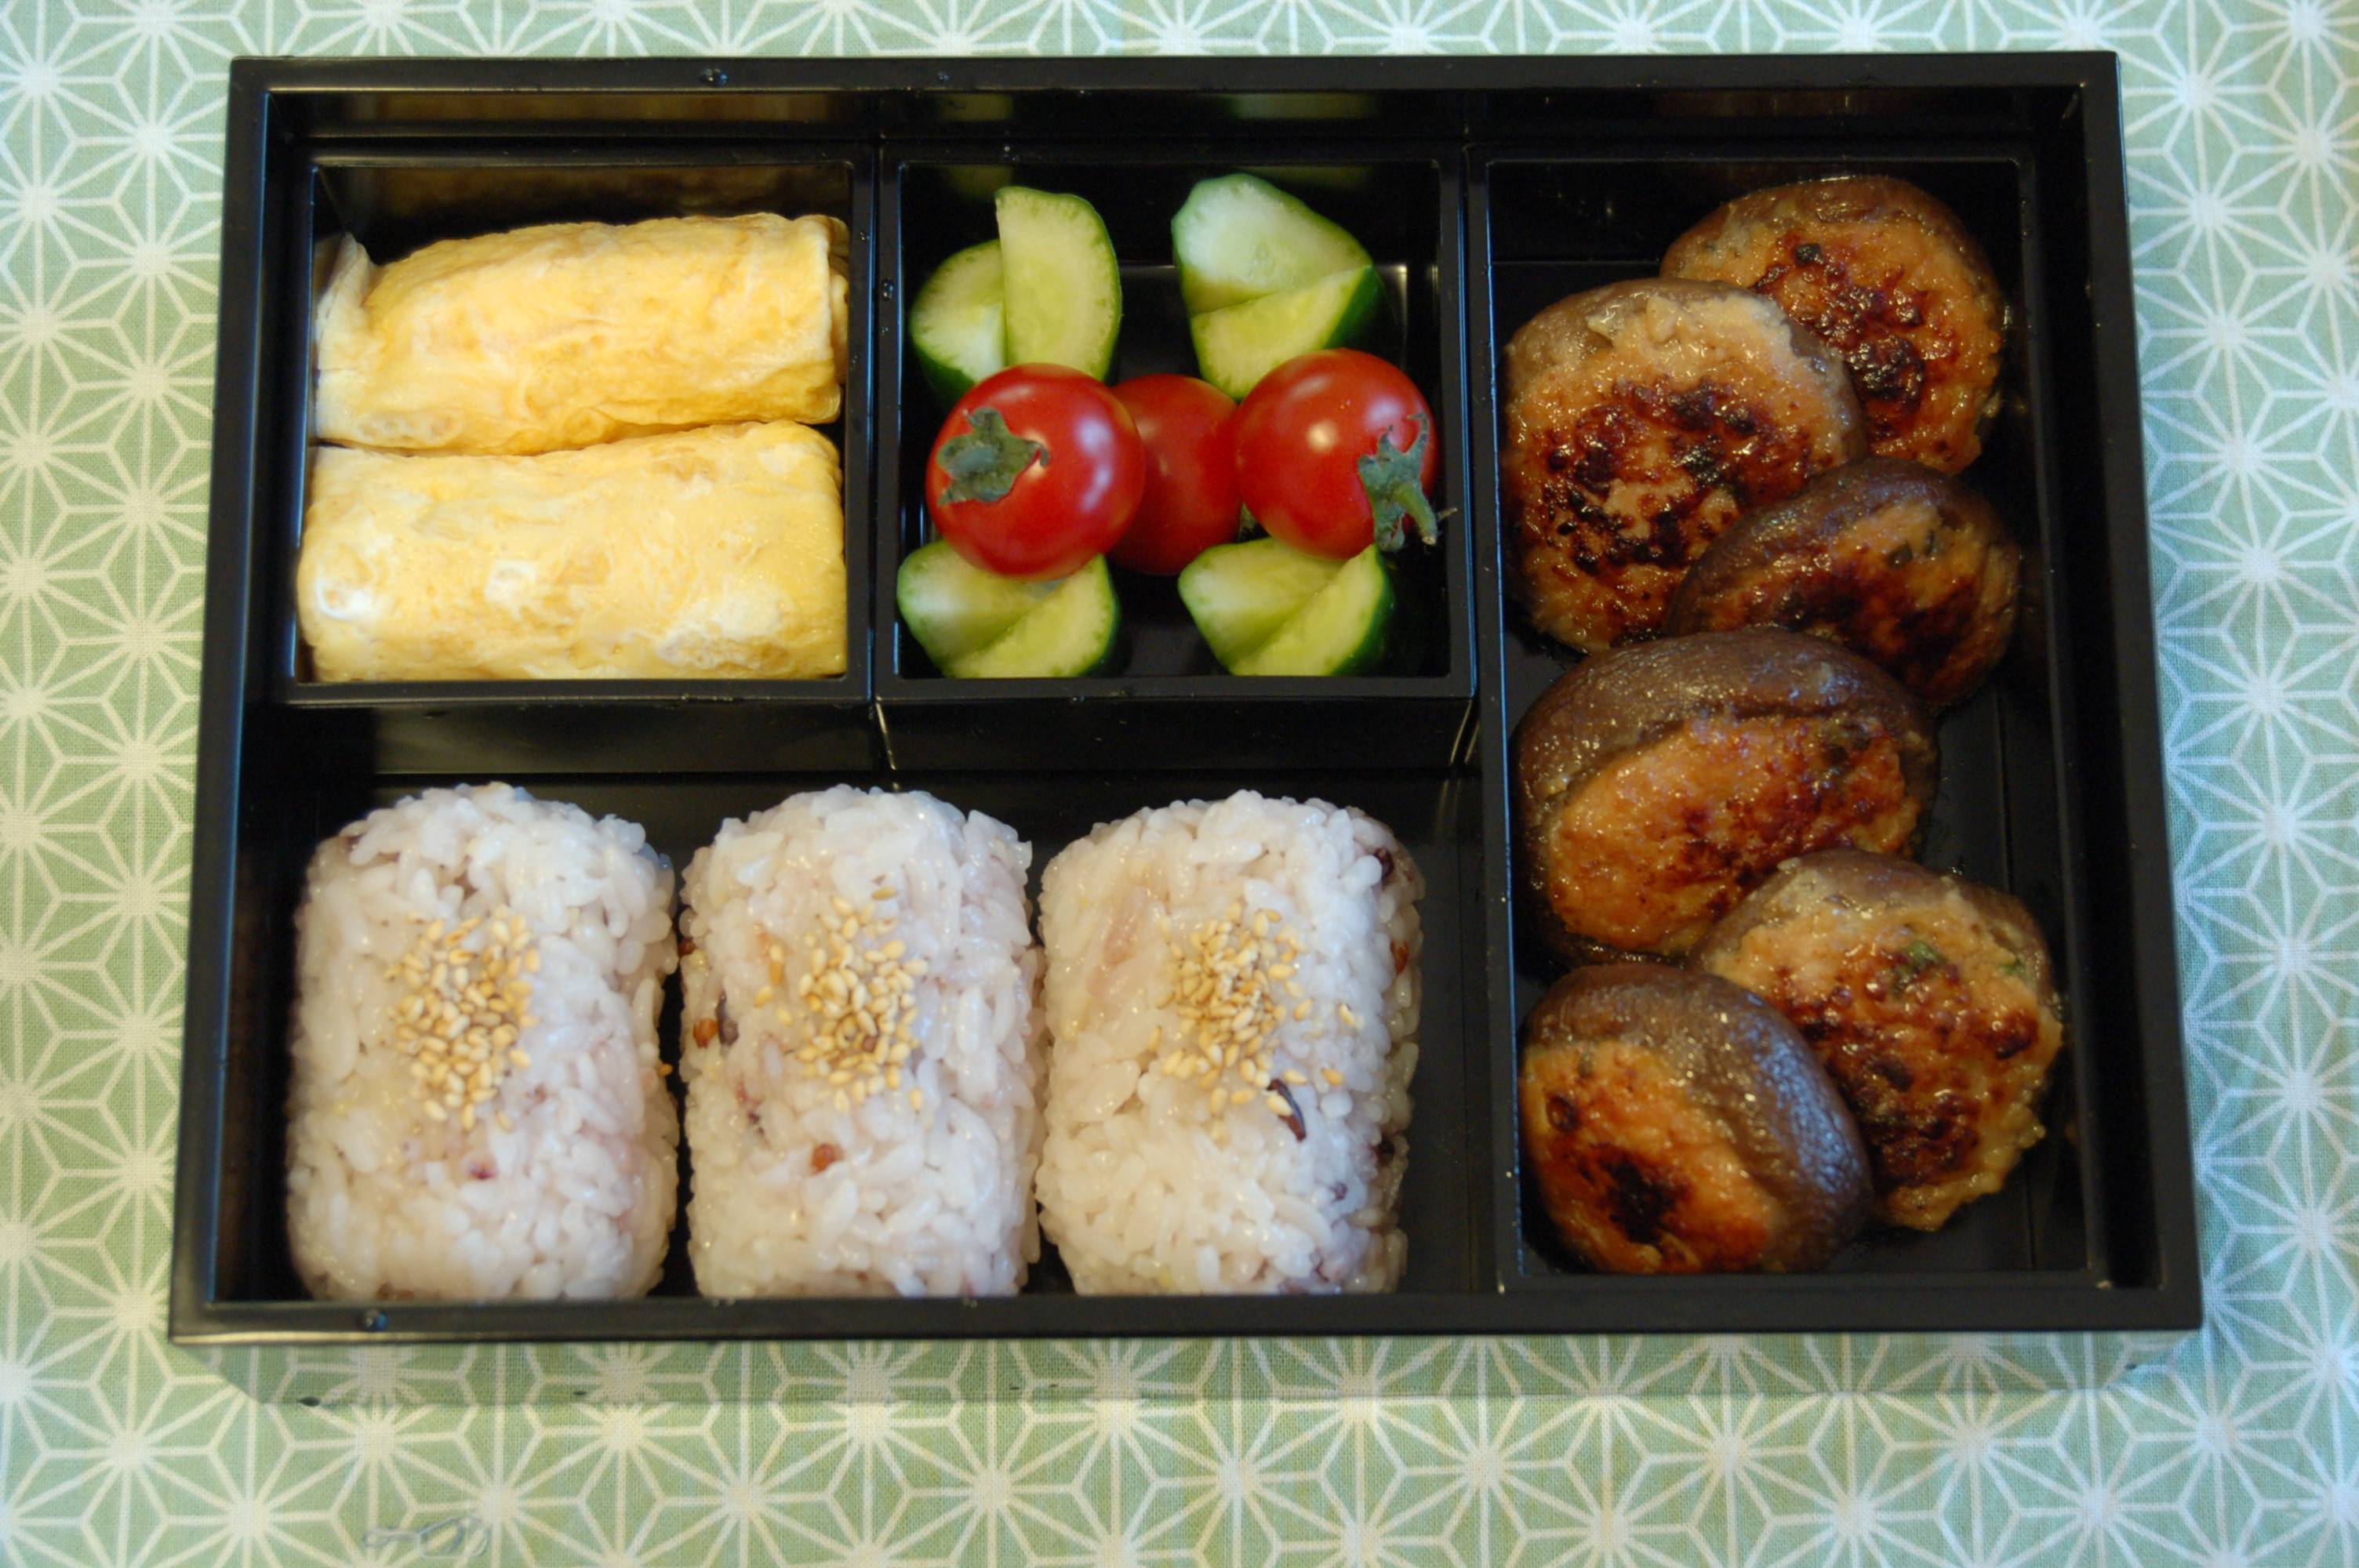 MT Products 6 x 6 Small 4 Compartments Bento Box for Lunch - Pack of 15